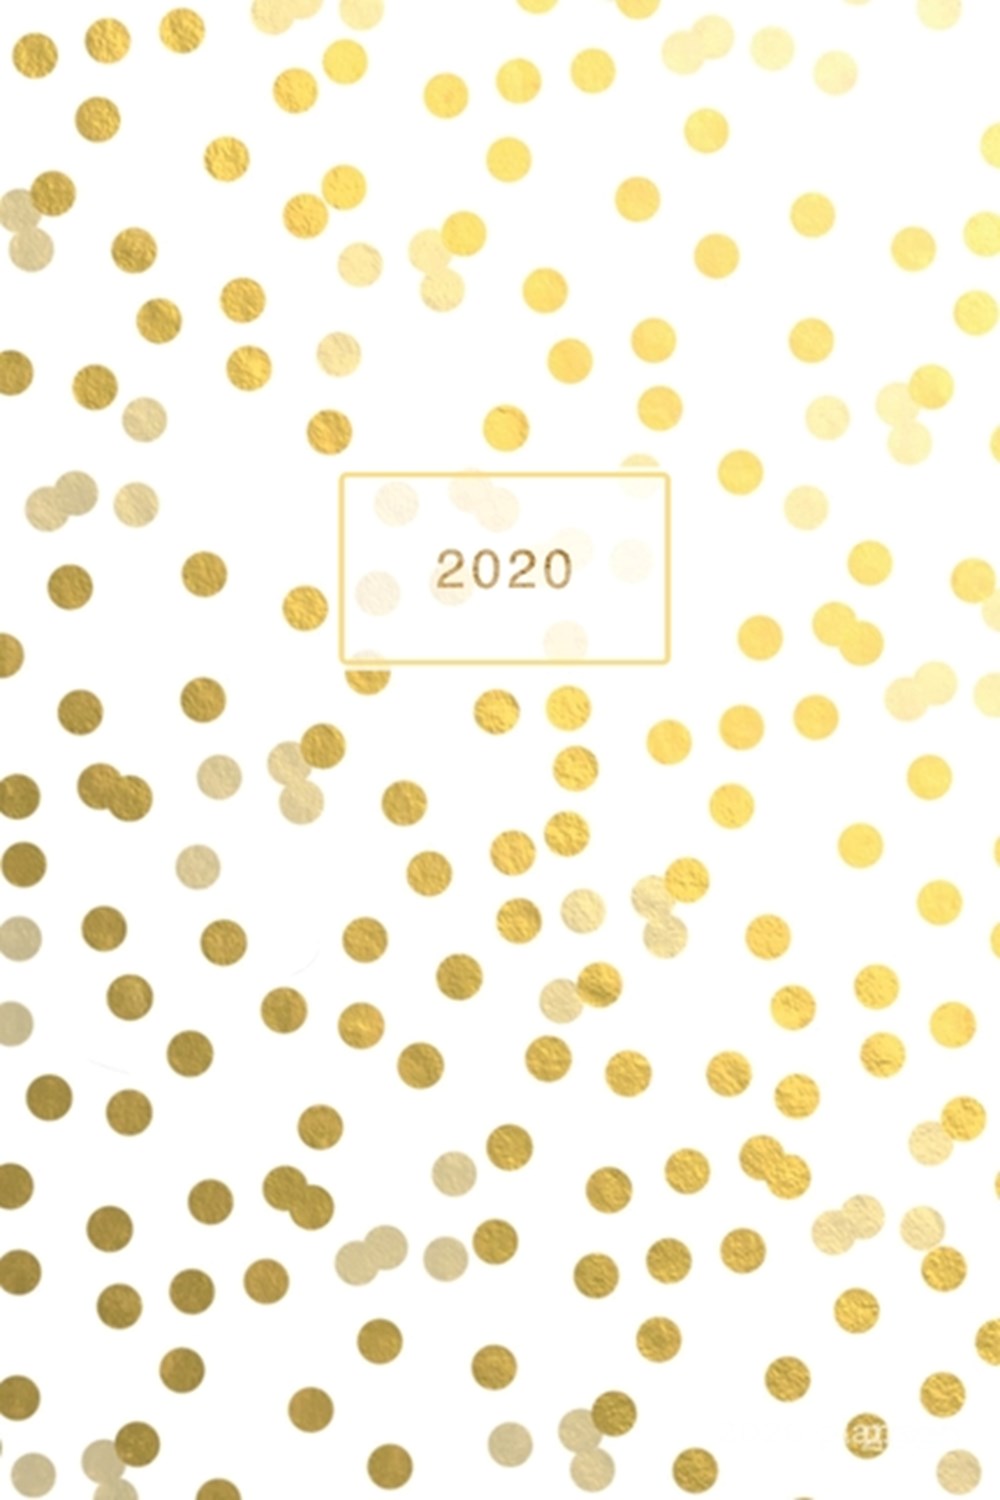 2020: Weekly + Monthly View - Gold Glitter Dots - 6x9 in - 2020 Calendar Organizer with Bonus Dotted